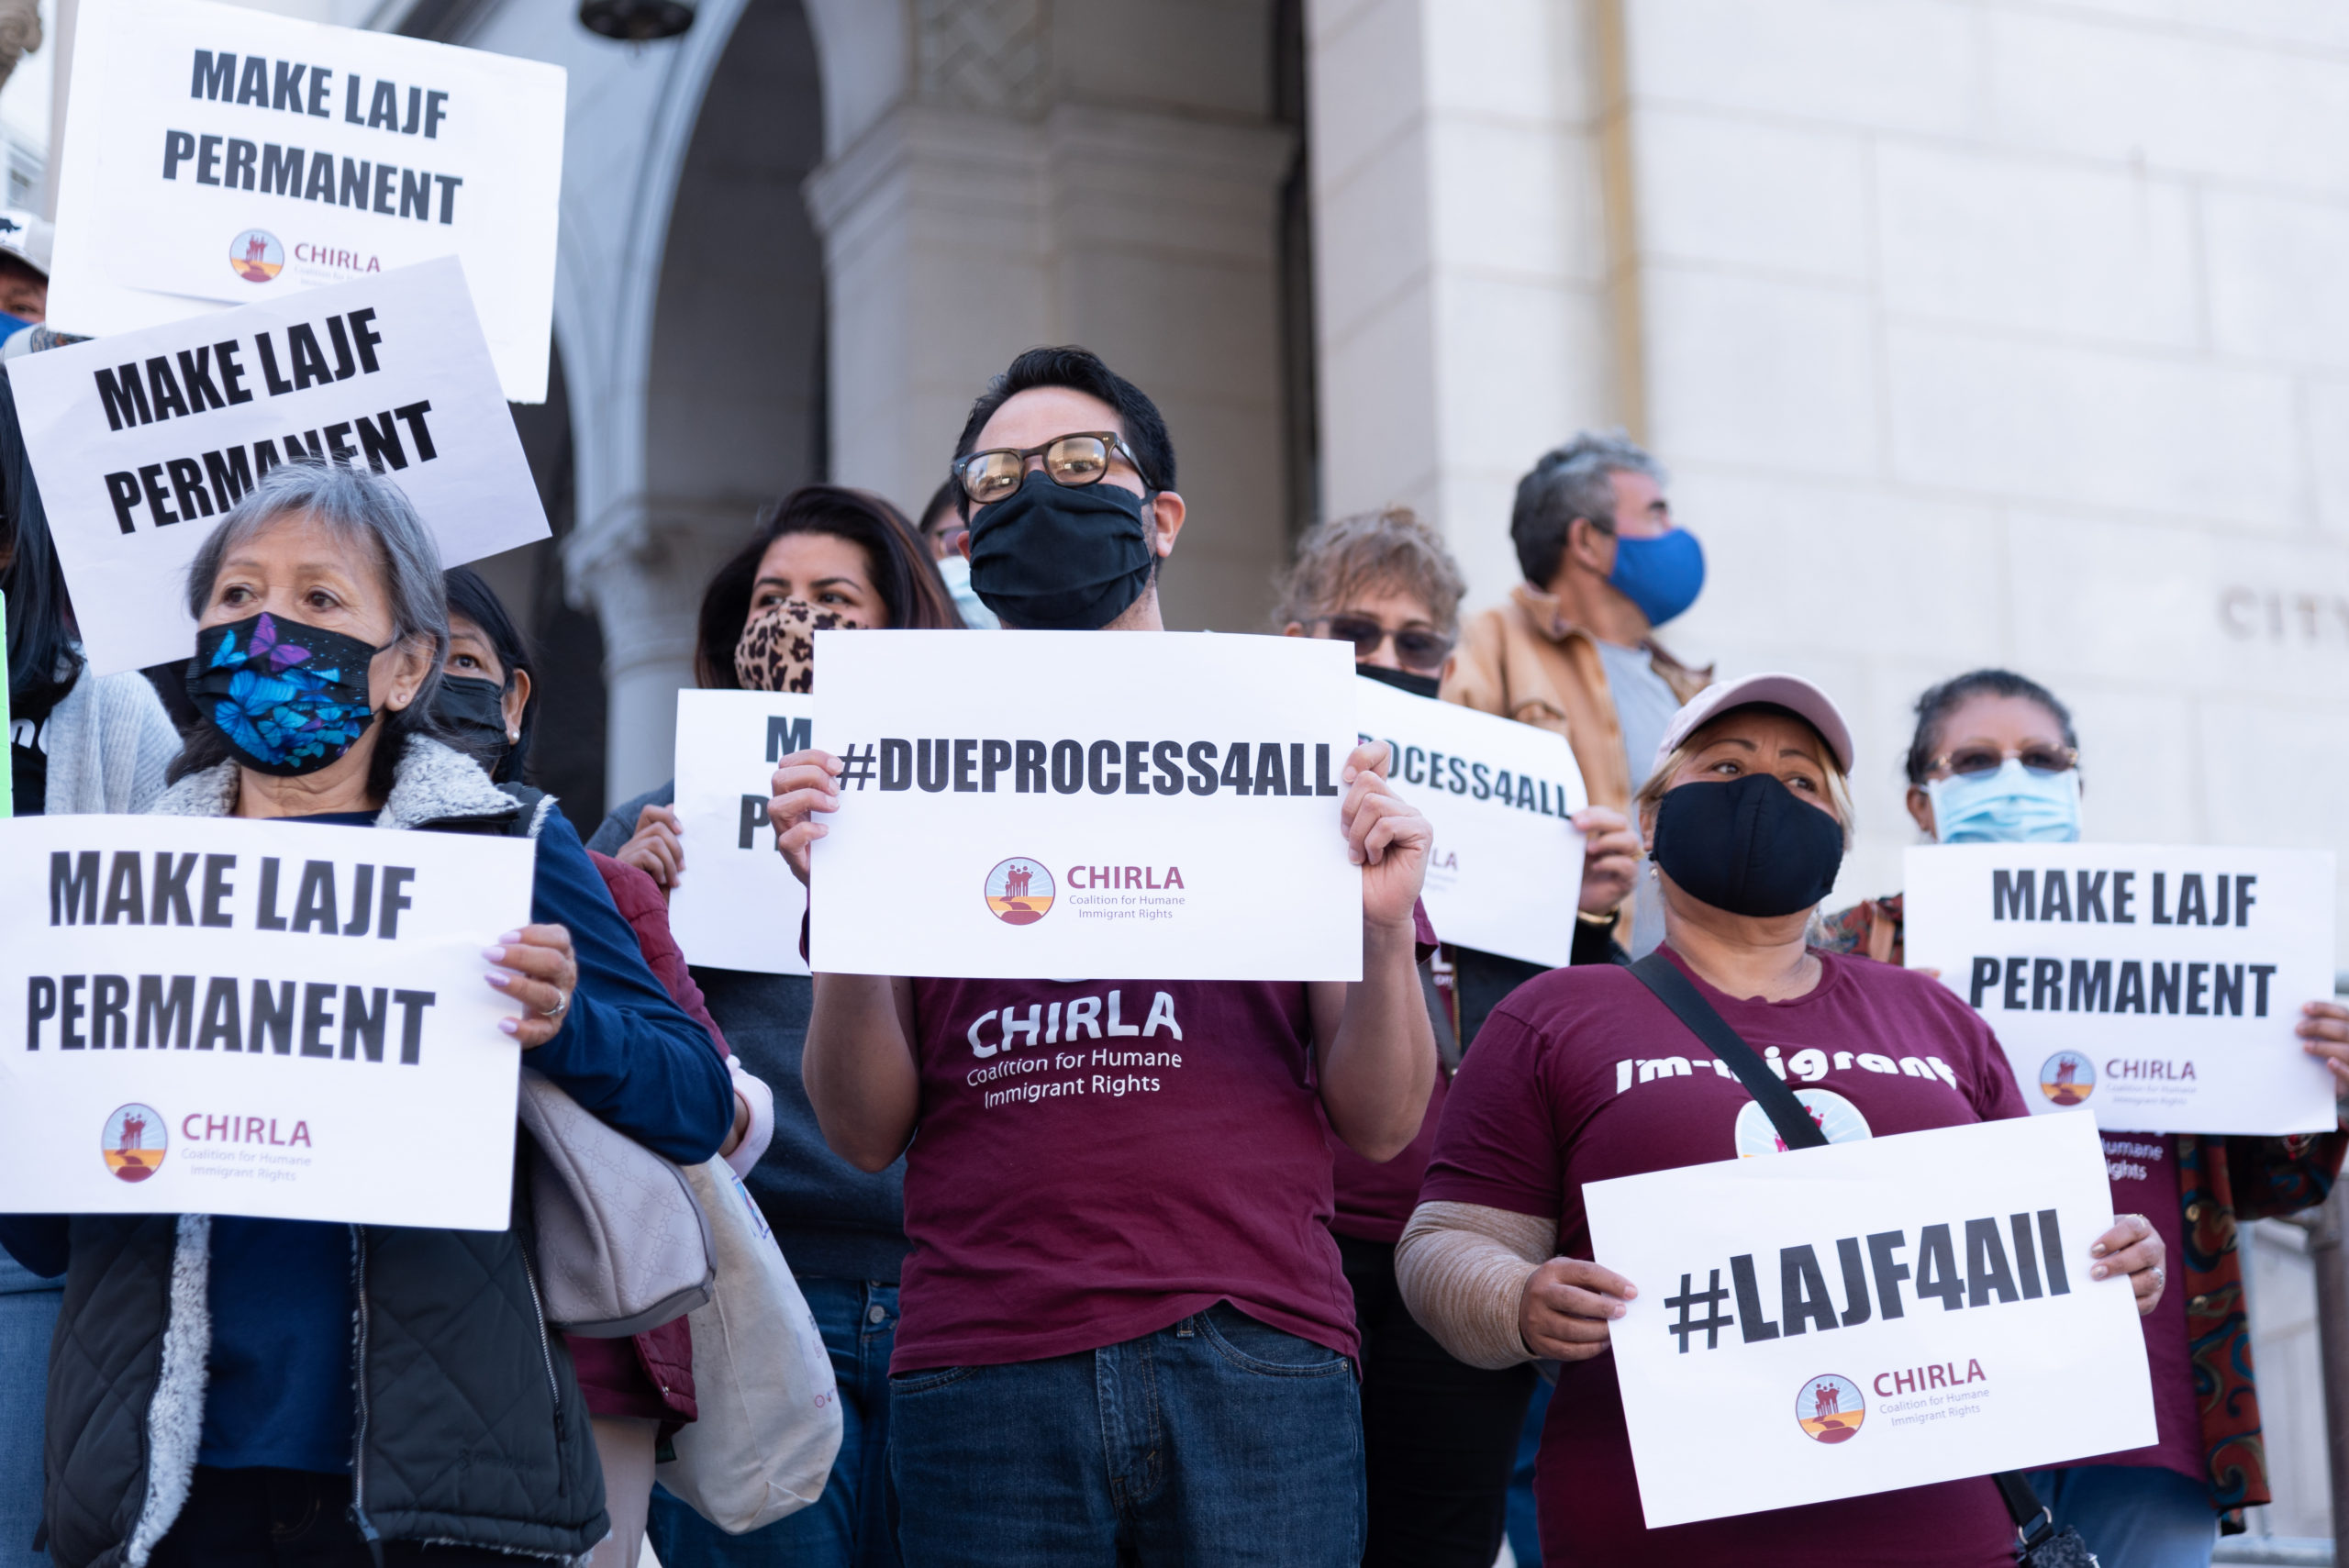 Protester wearing a red CHIRLA shirt and black mask holding a sign that says #DueProcess4All in front of a crowd of other protestors.